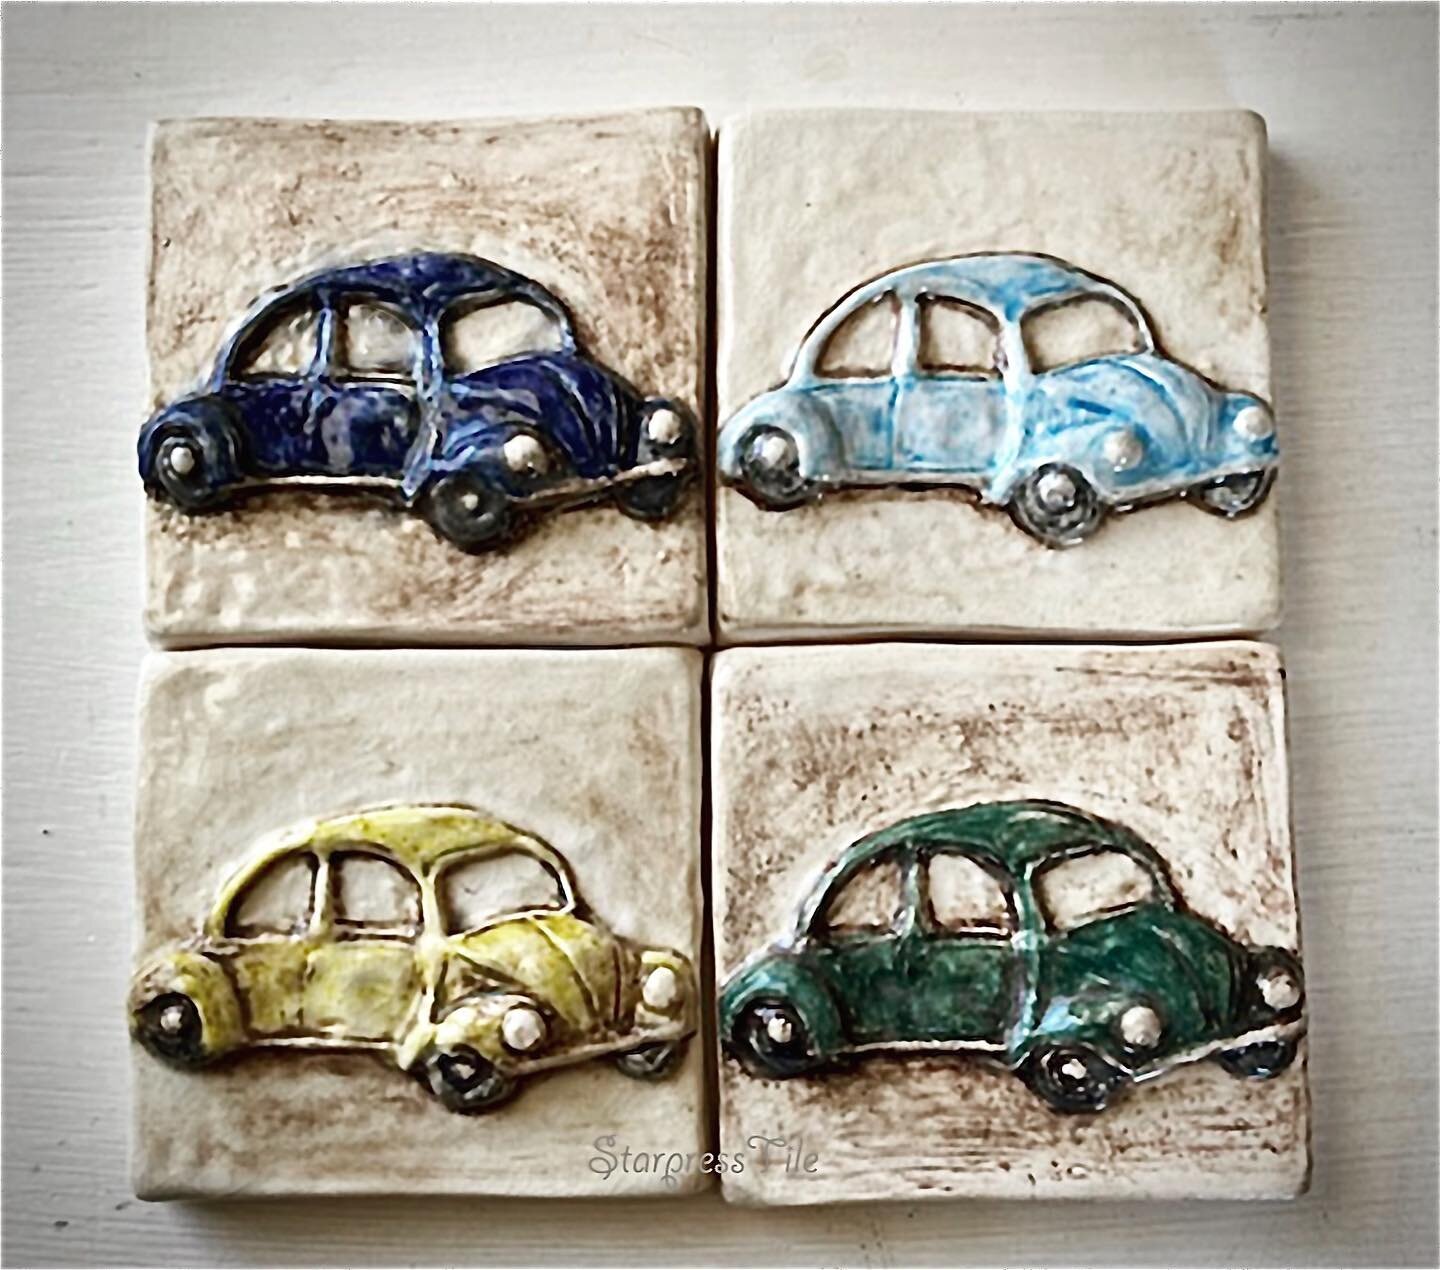 Hand painted VW inspired ceramic art tiles. 

✨Thanks for following along my tilemaking journey--! I greatly appreciate the followers and inspiring artists i have discovered on this platform, have a great evening!
.
.
.
.
.
.
.
.
.
#favoritecar #vwbe